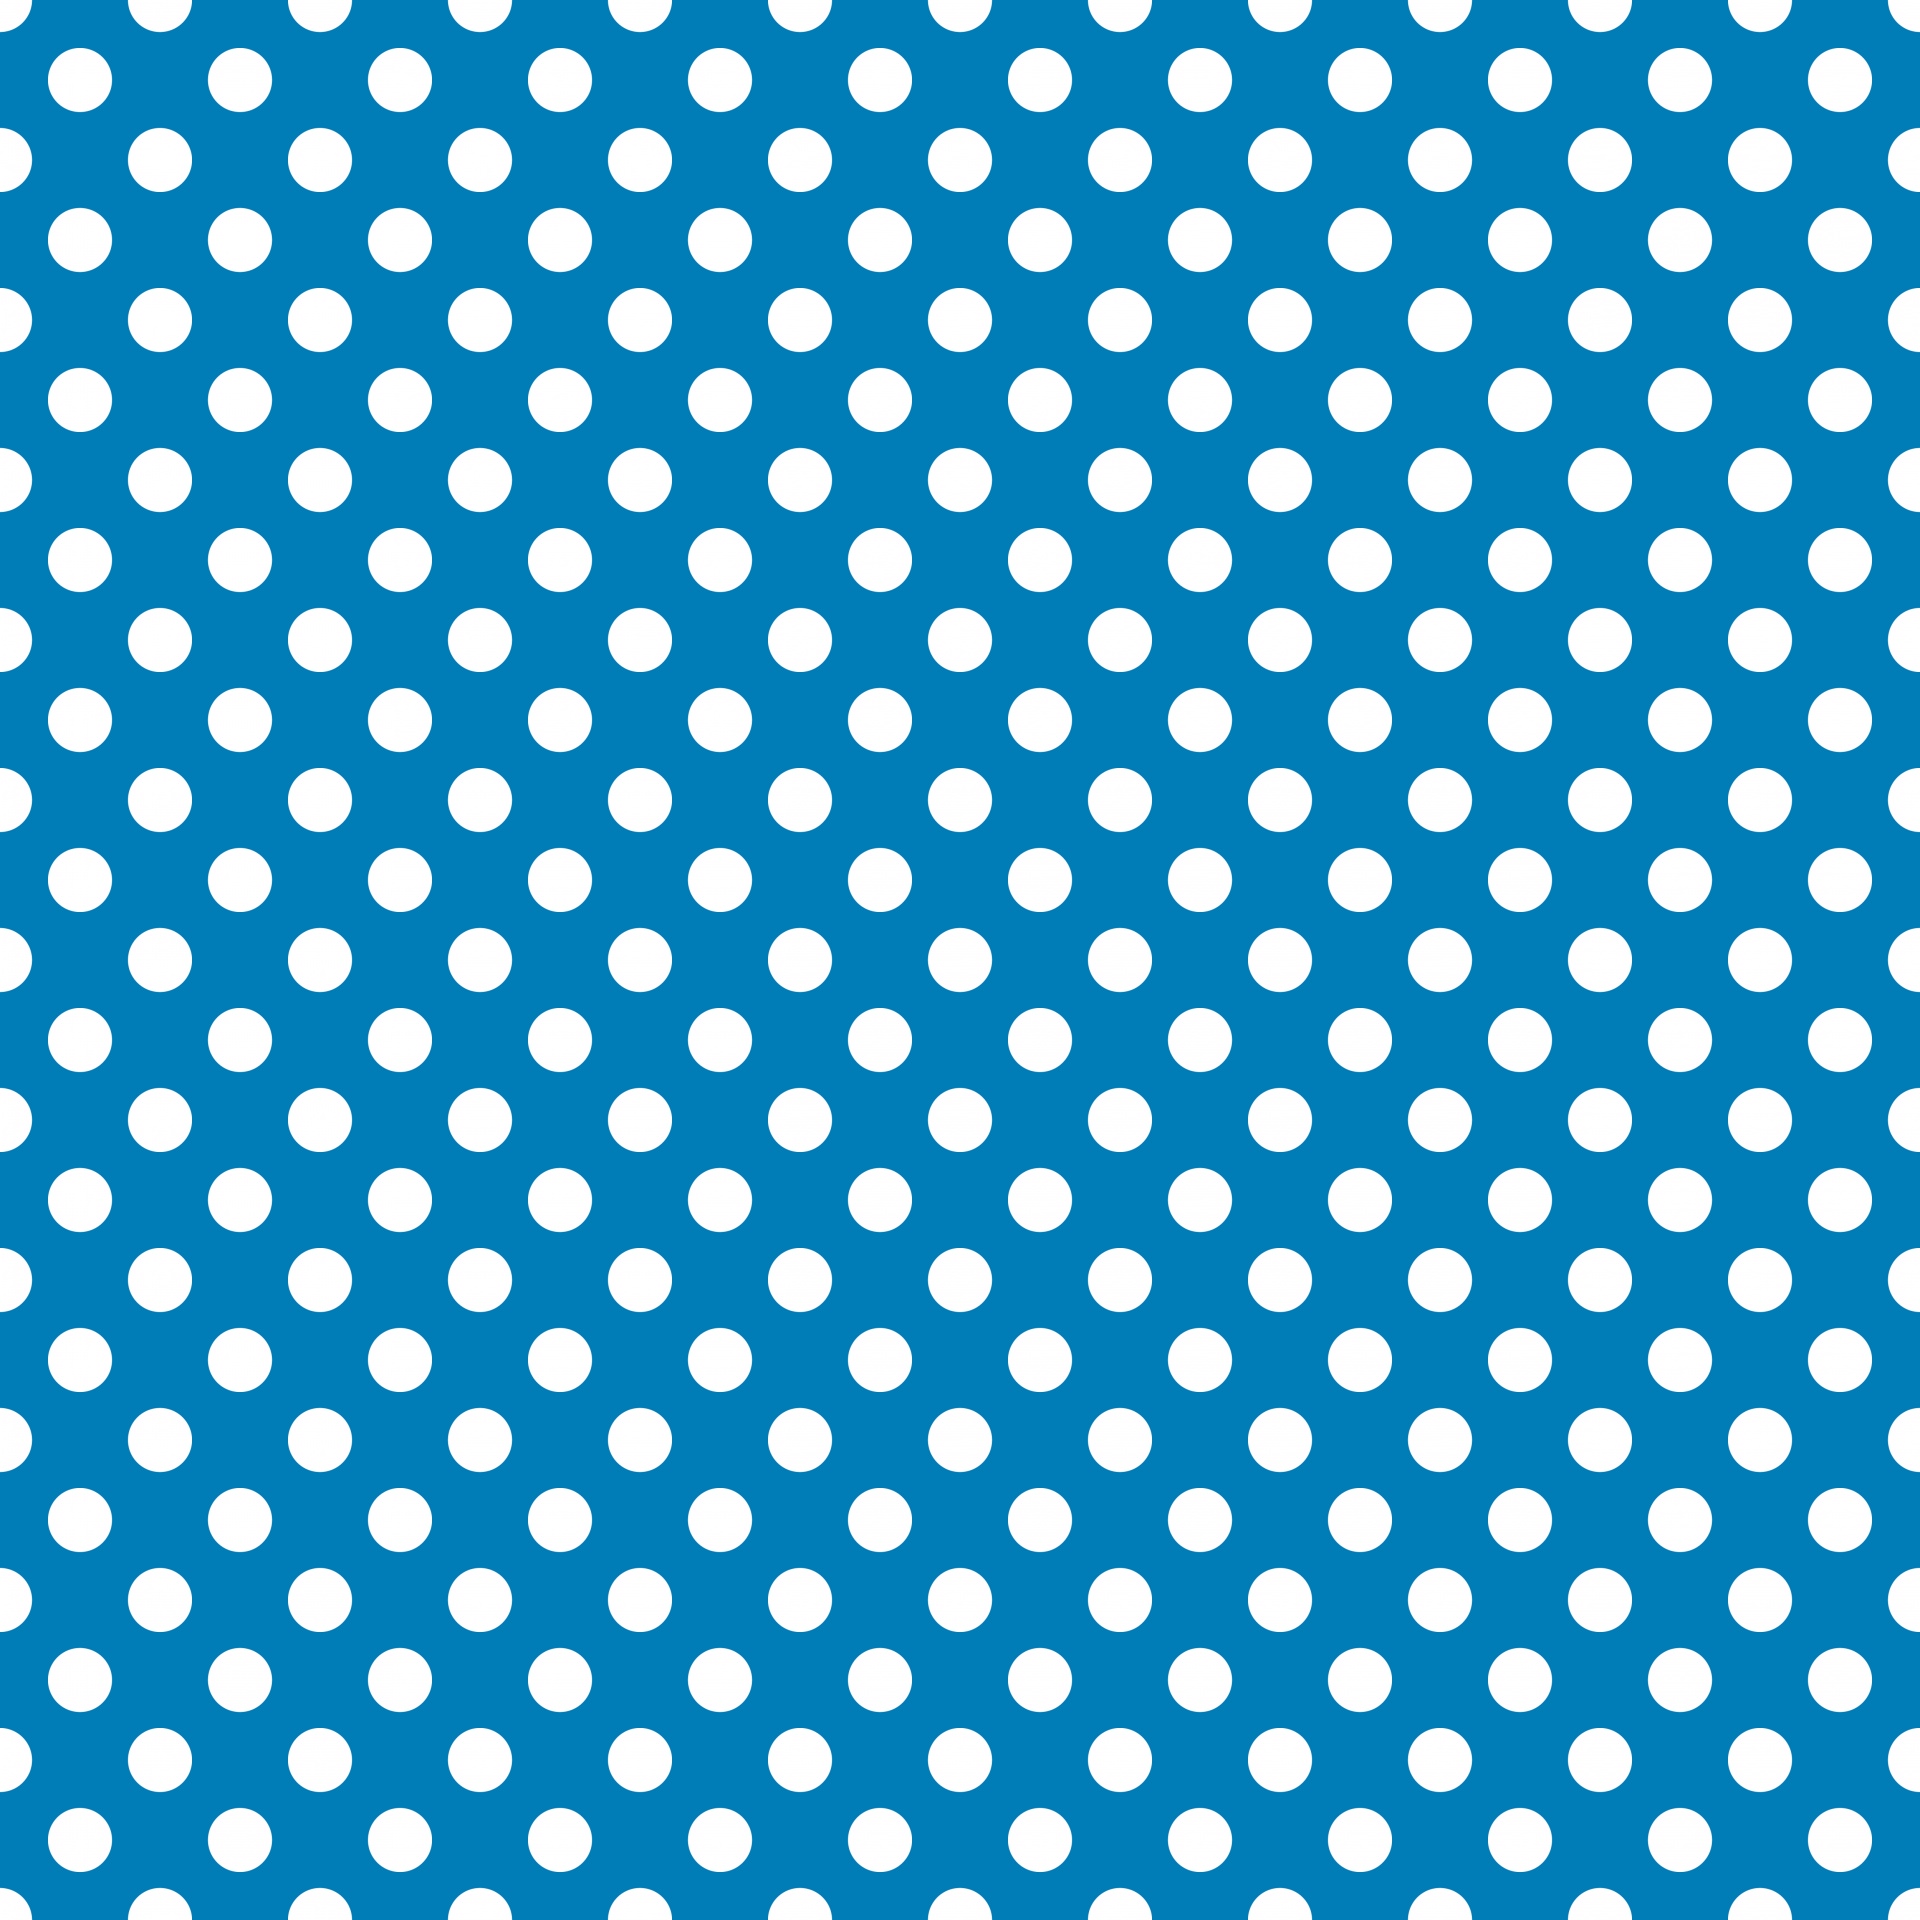 Default Windows 10 Wallpaper Is Filled With Dots With - vrogue.co